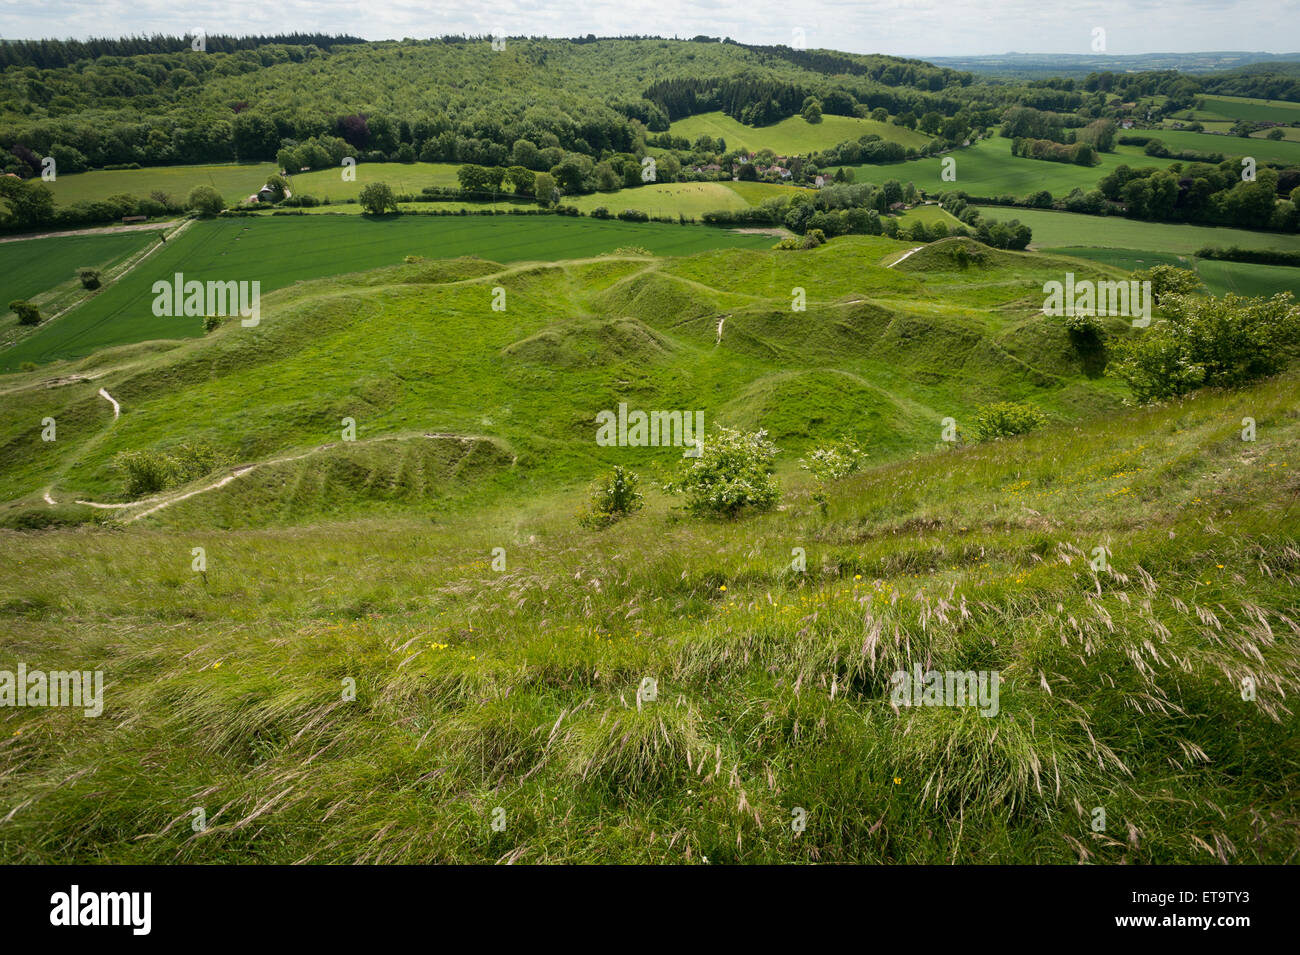 Cley Hill, vicino Warminster, Wiltshire. Foto Stock